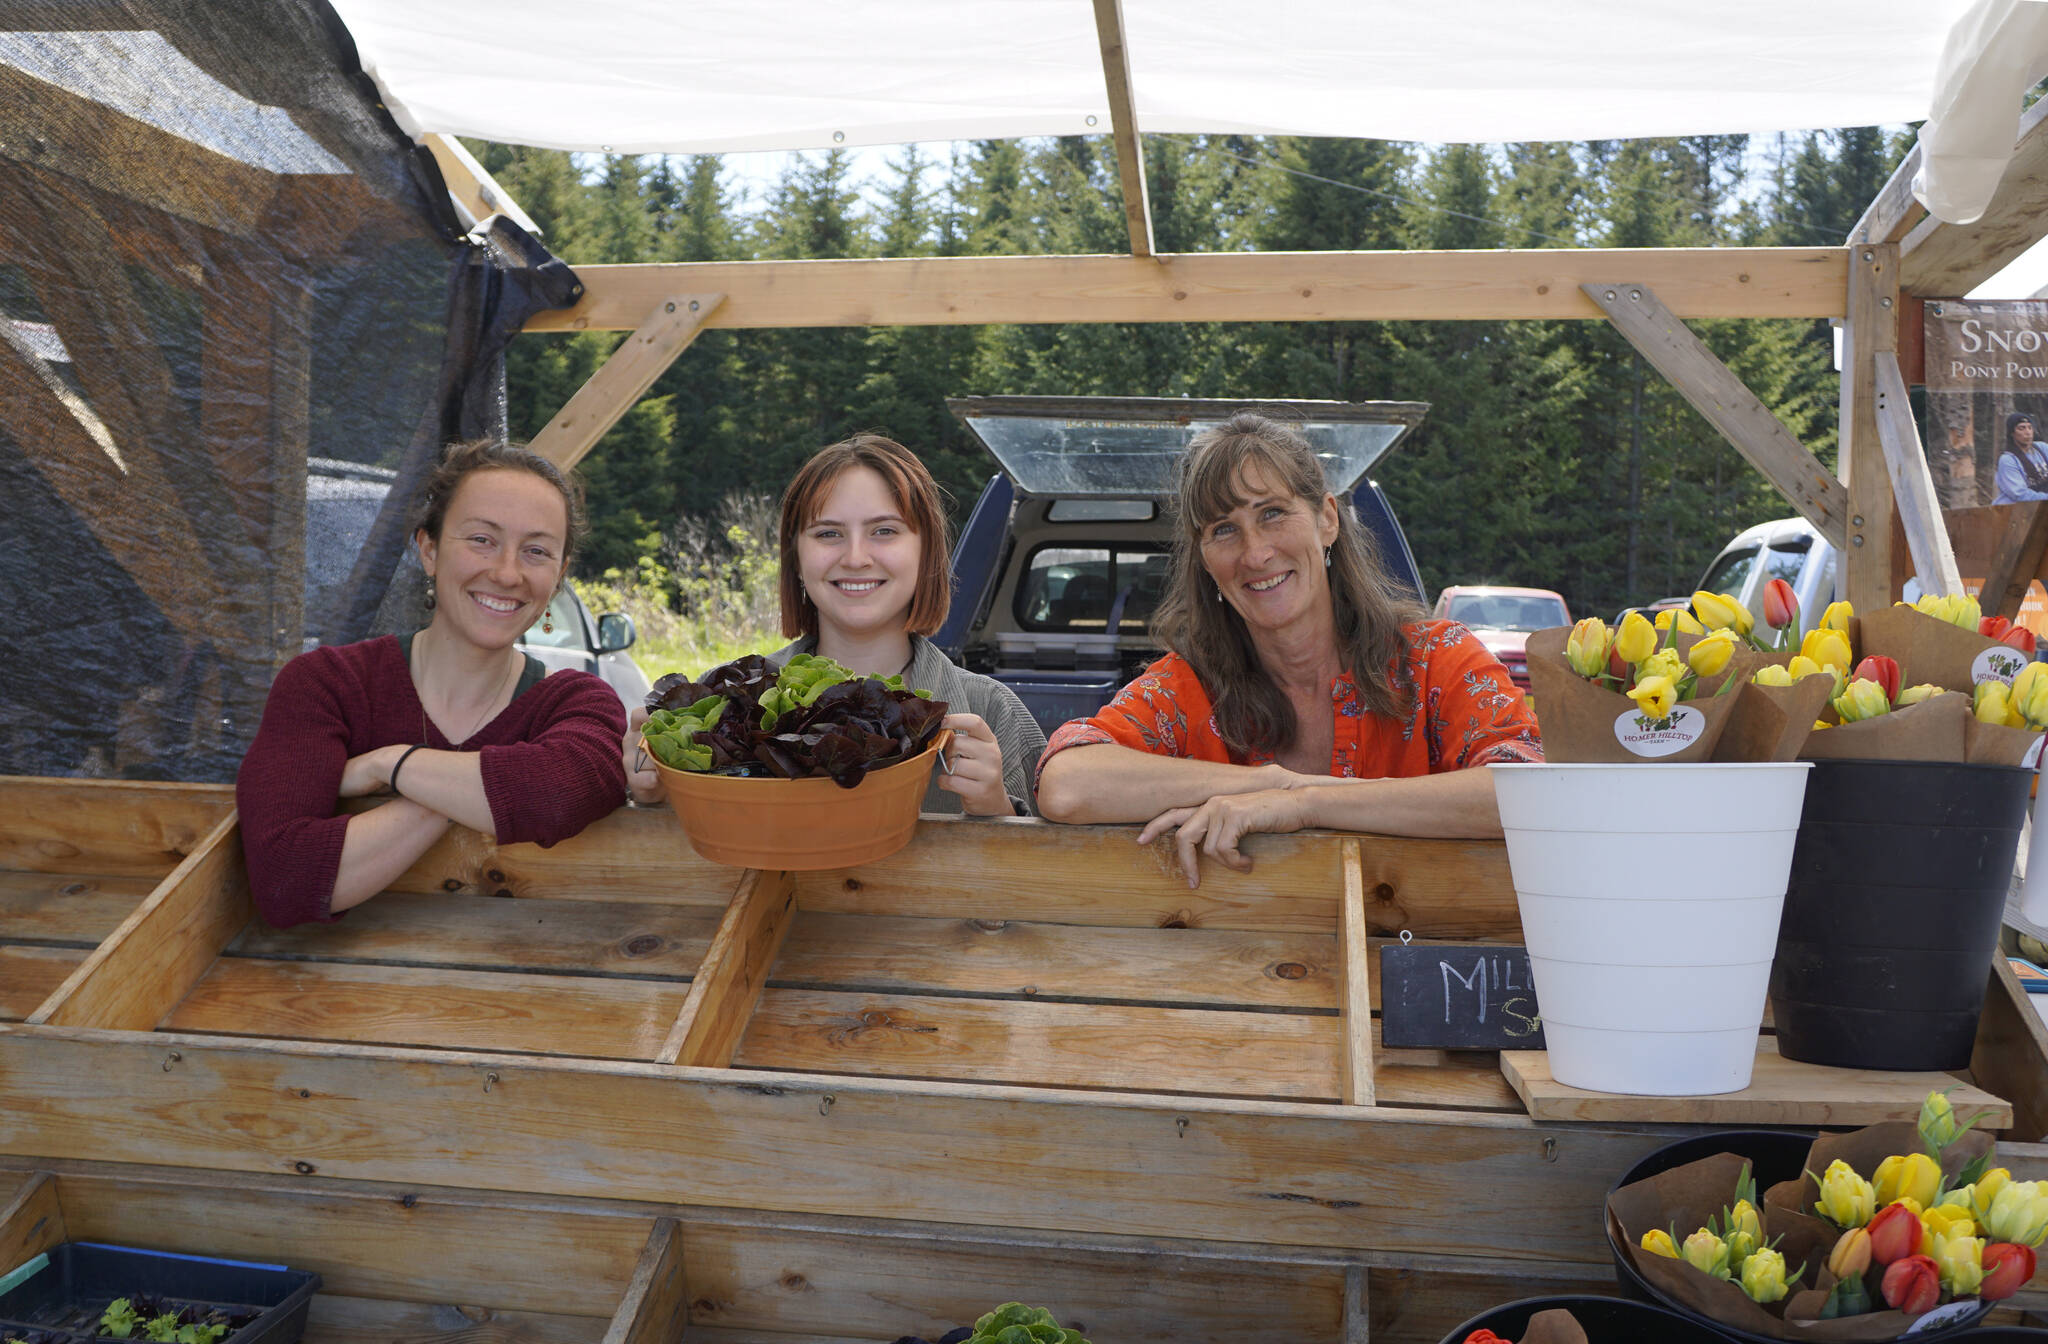 Homer Hilltop Farm workers are all smiles after selling out mixed greens on the first day of the Homer Farmers Market on Saturday, May 28, 2022, in Homer, Alaska. From left to right are Anna Passaniti, Abby Blaize and farm owner Carey Restino. (Photo by Michael Armstrong/Homer News)